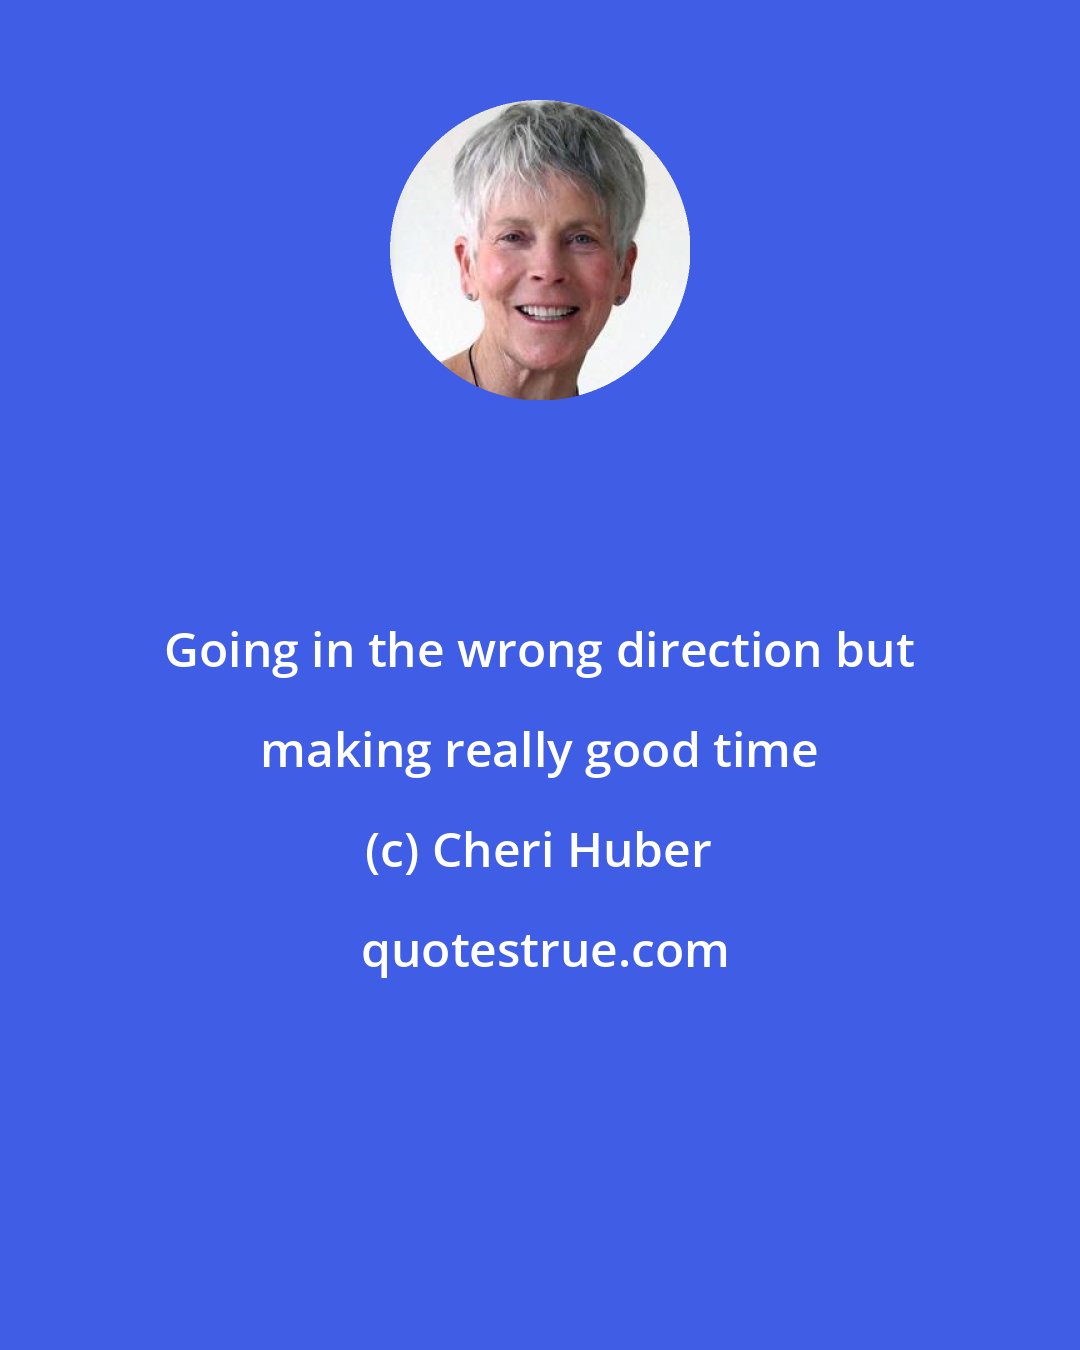 Cheri Huber: Going in the wrong direction but making really good time